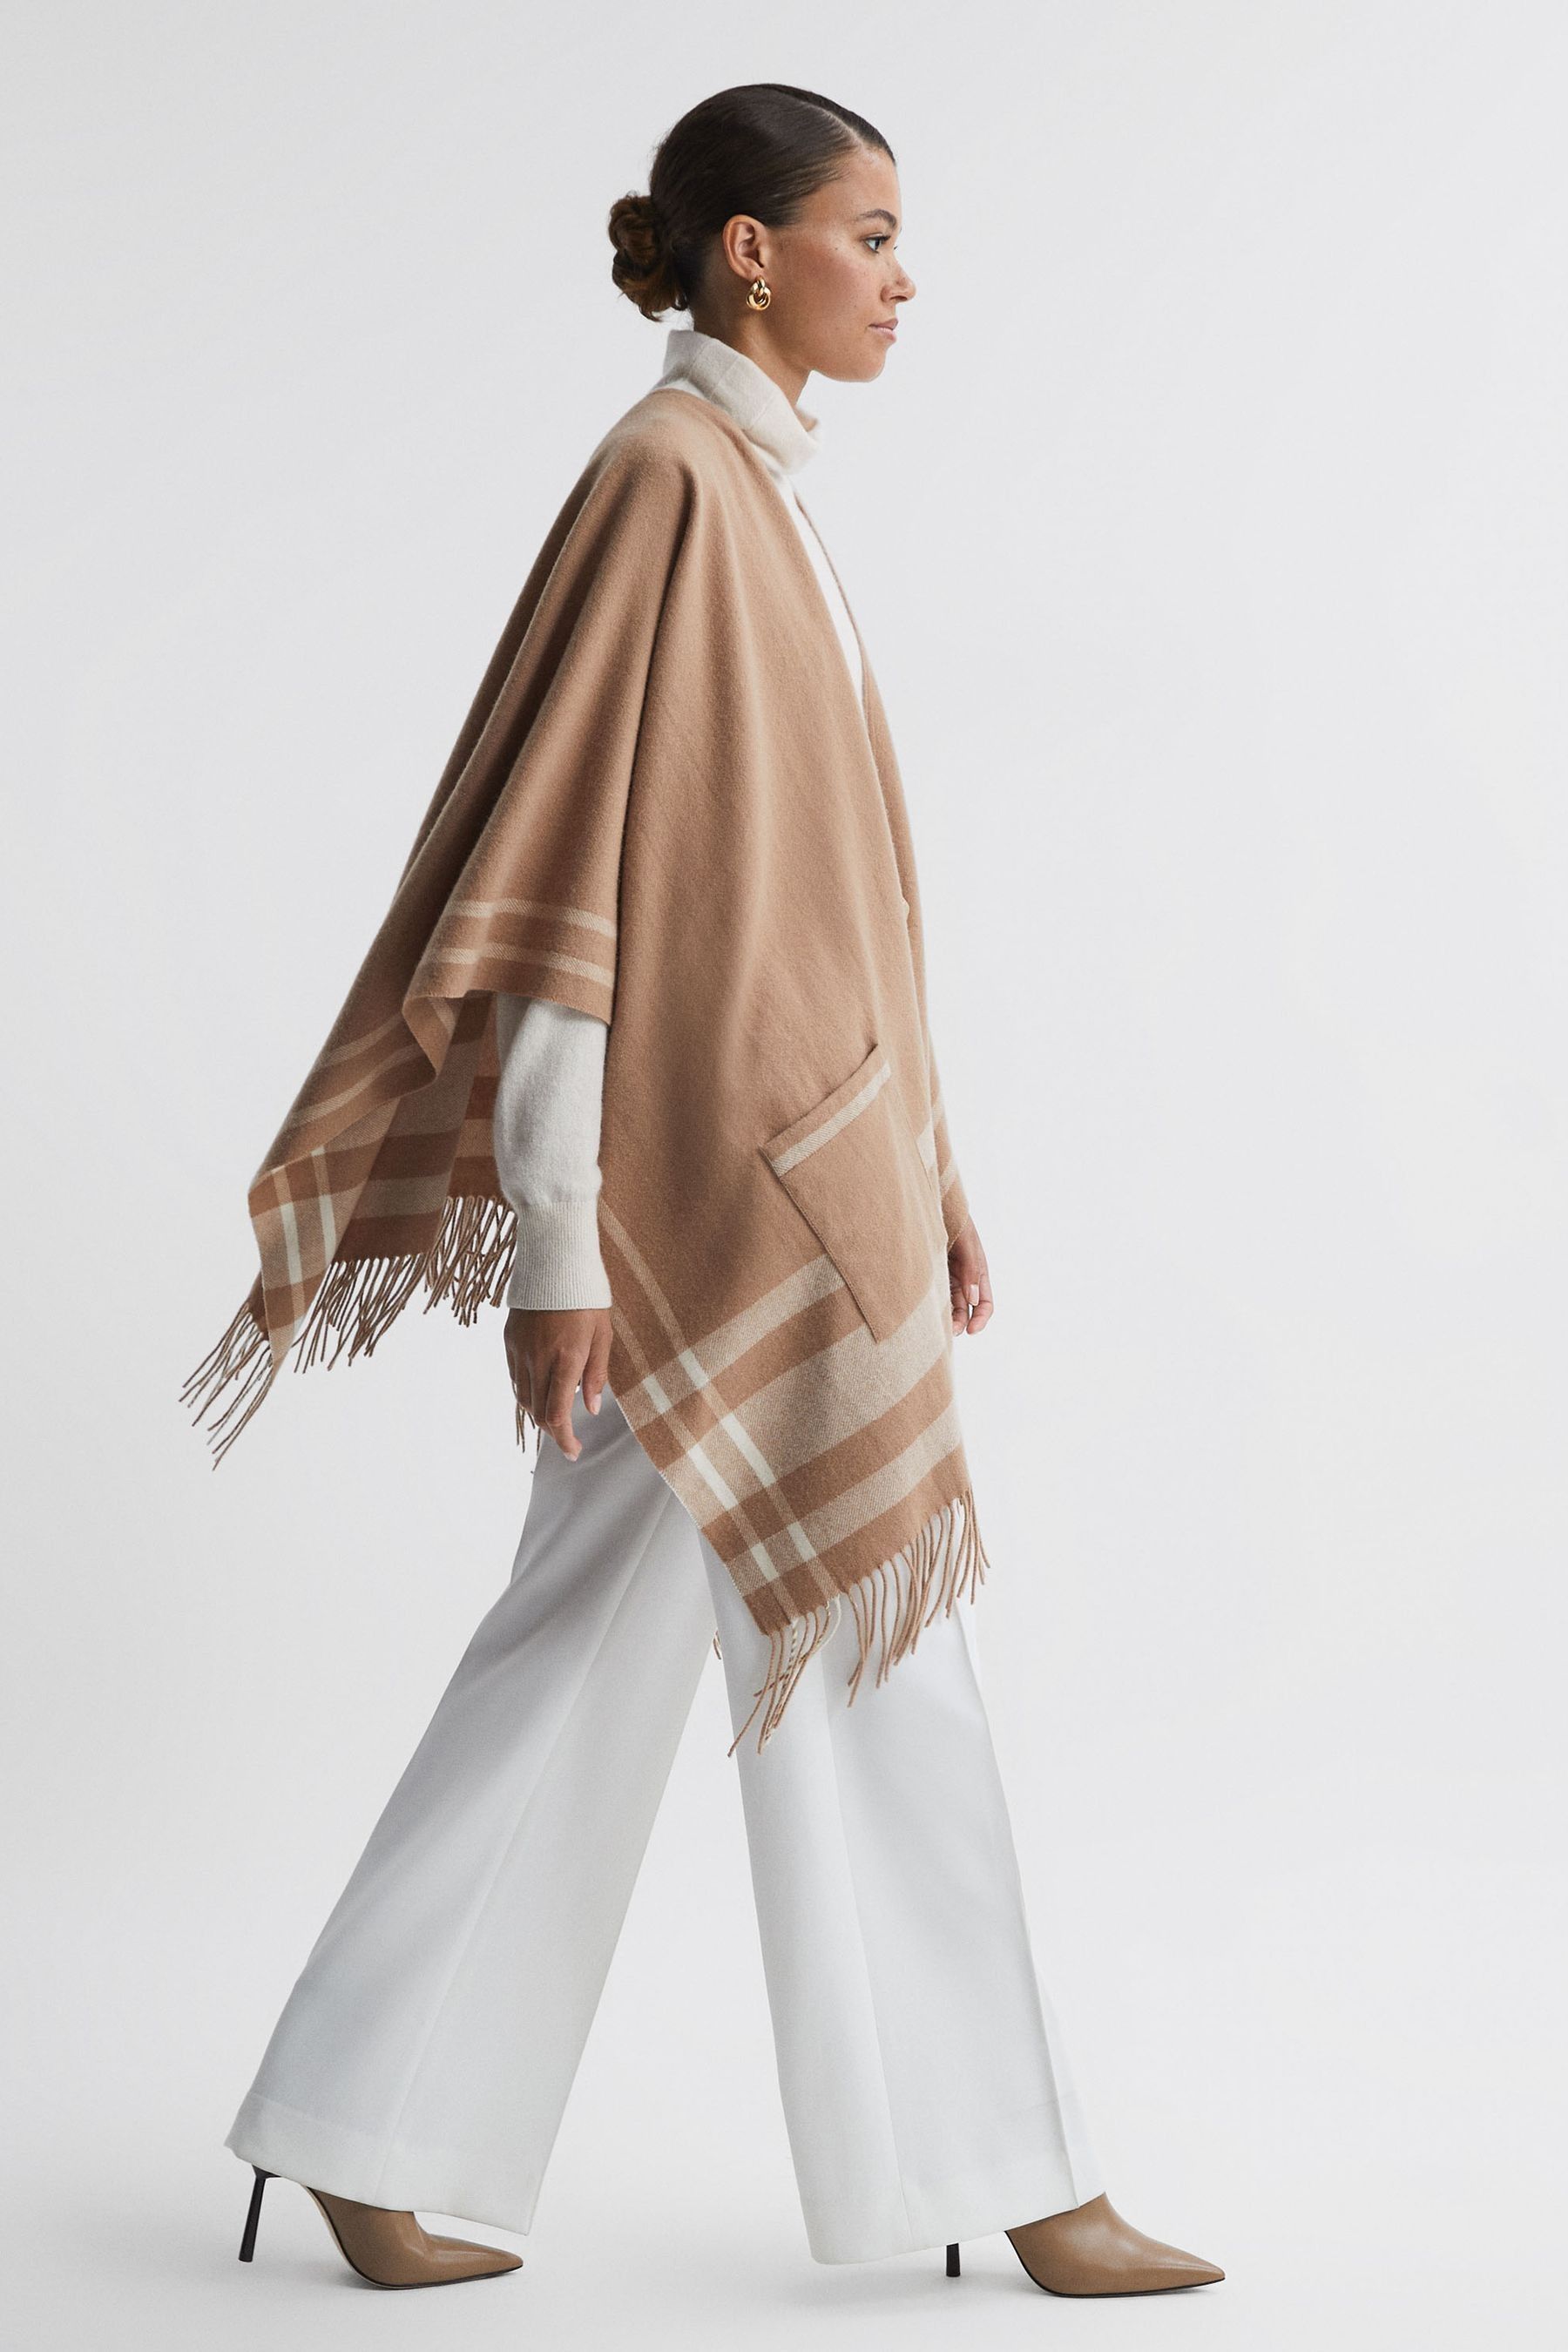 REISS CATALINA - CAMEL WOOL STRIPED CAPE, ONE